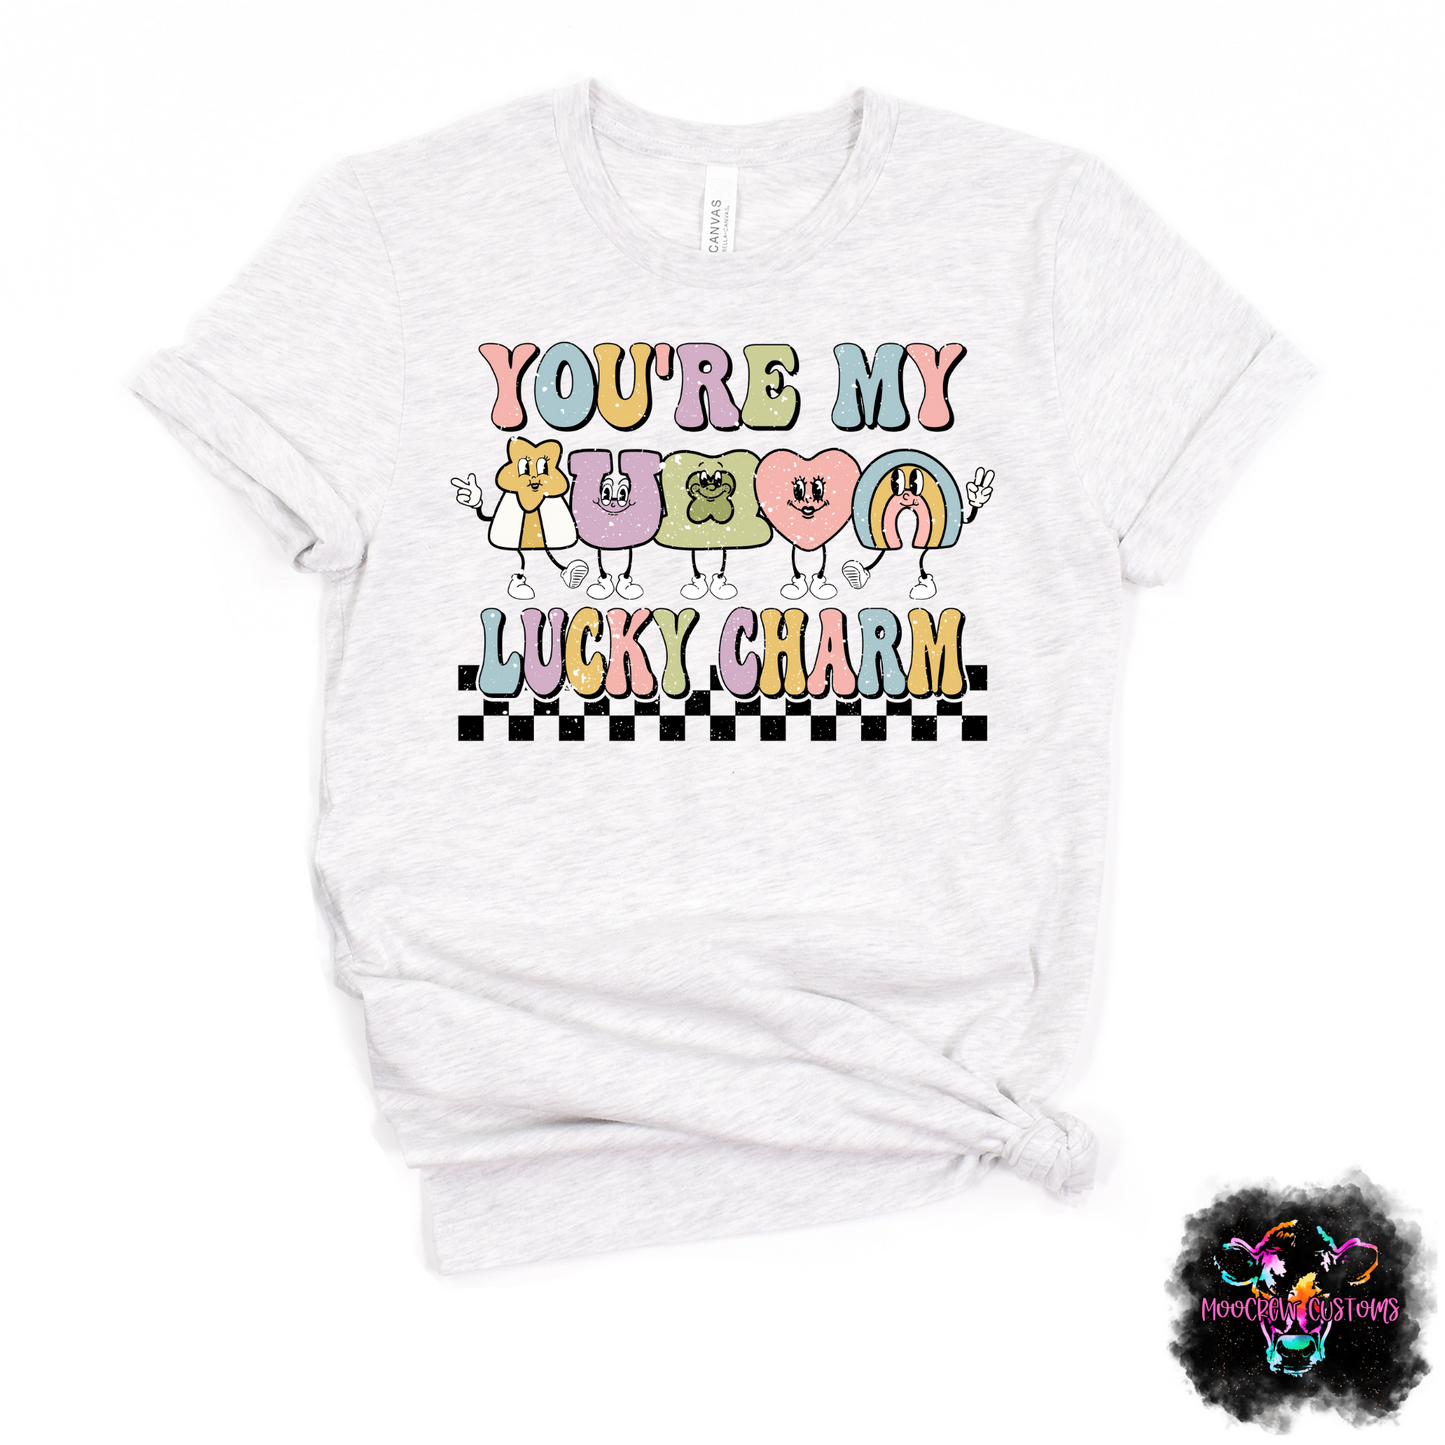 You're My Lucky Charm Tshirt